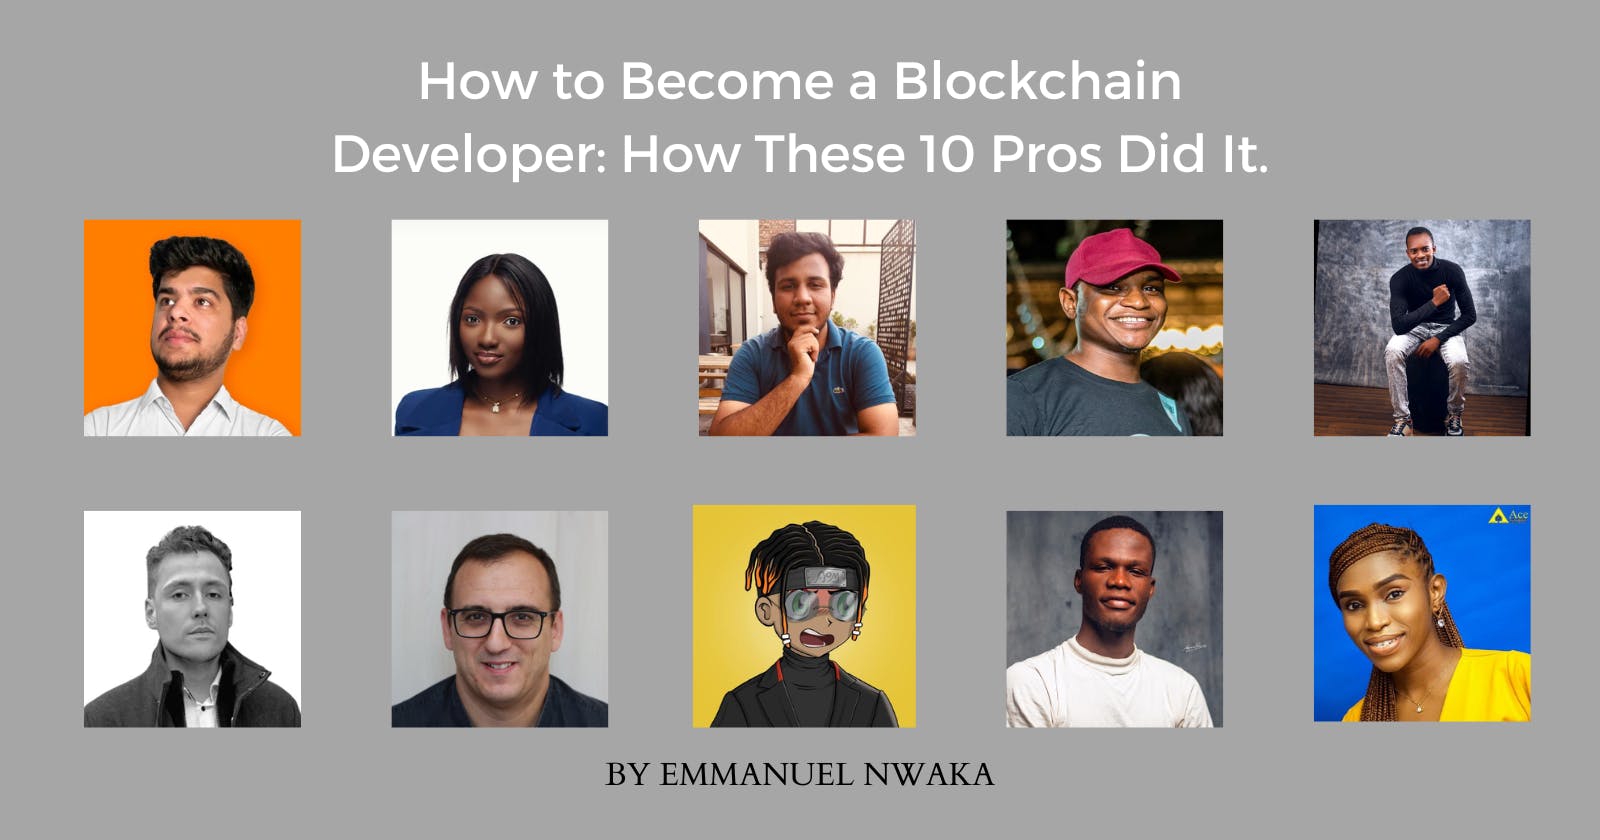 How to Become a Blockchain Developer: How These 10 Pros Did It.